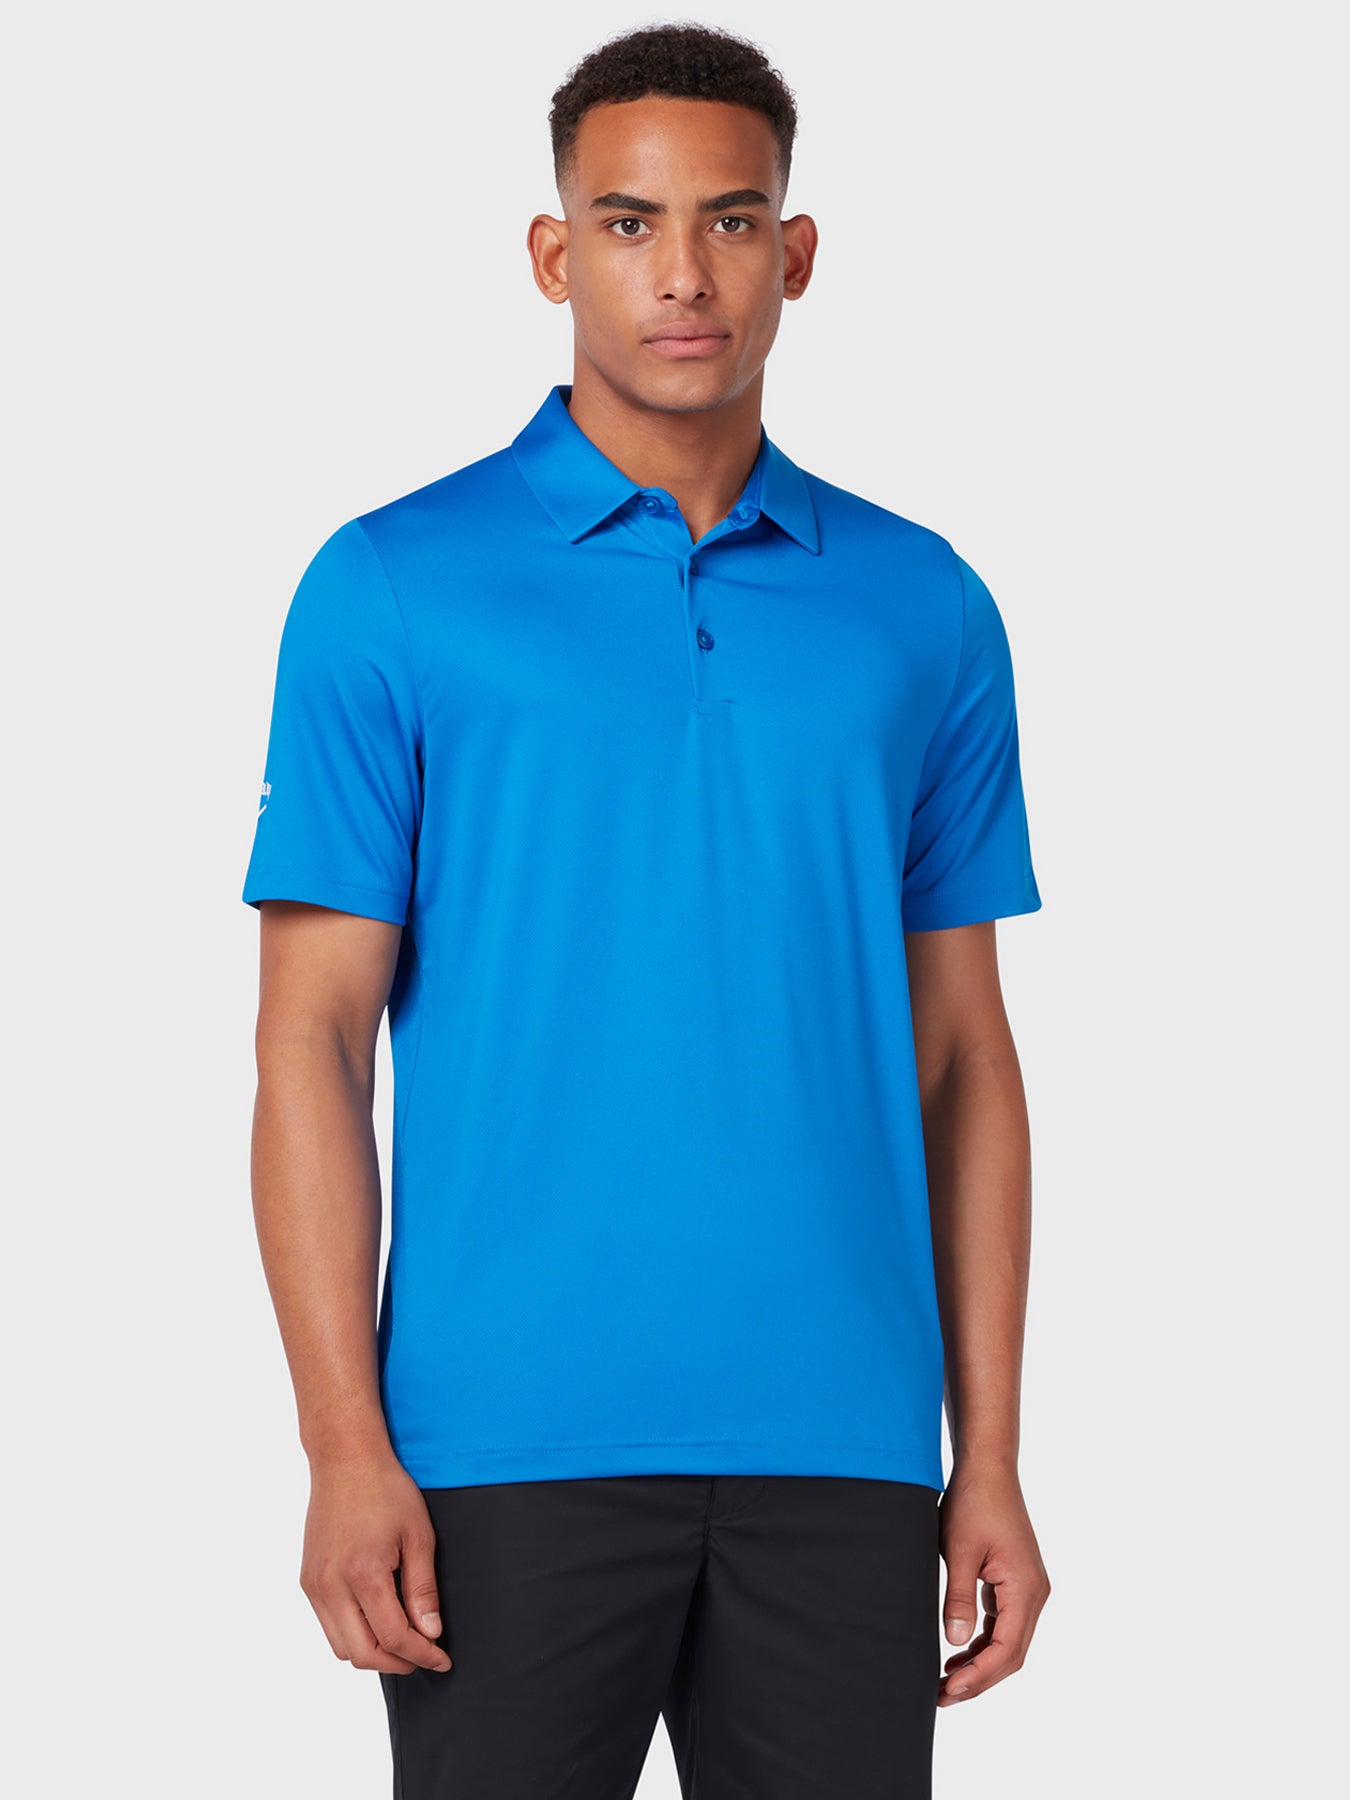 View Swing Tech Tour Polo In Magnetic Blue Magnetic Blue XS information